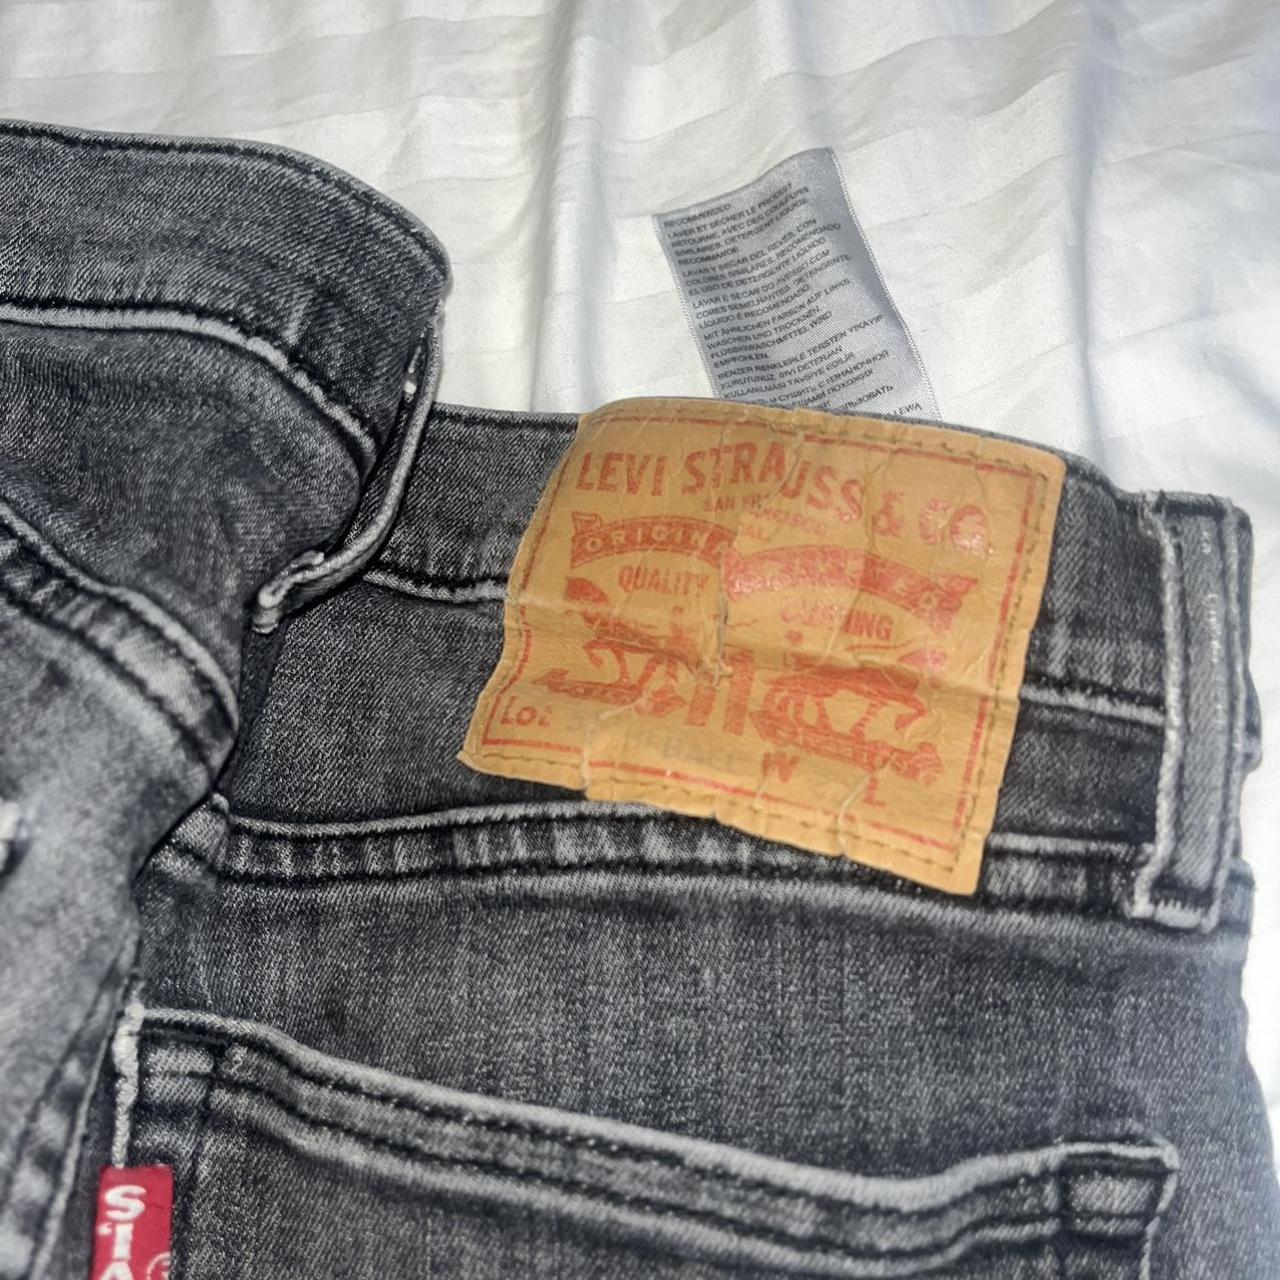 Levi’s skinny jeans crotch rip can be repaired w32l32 - Depop